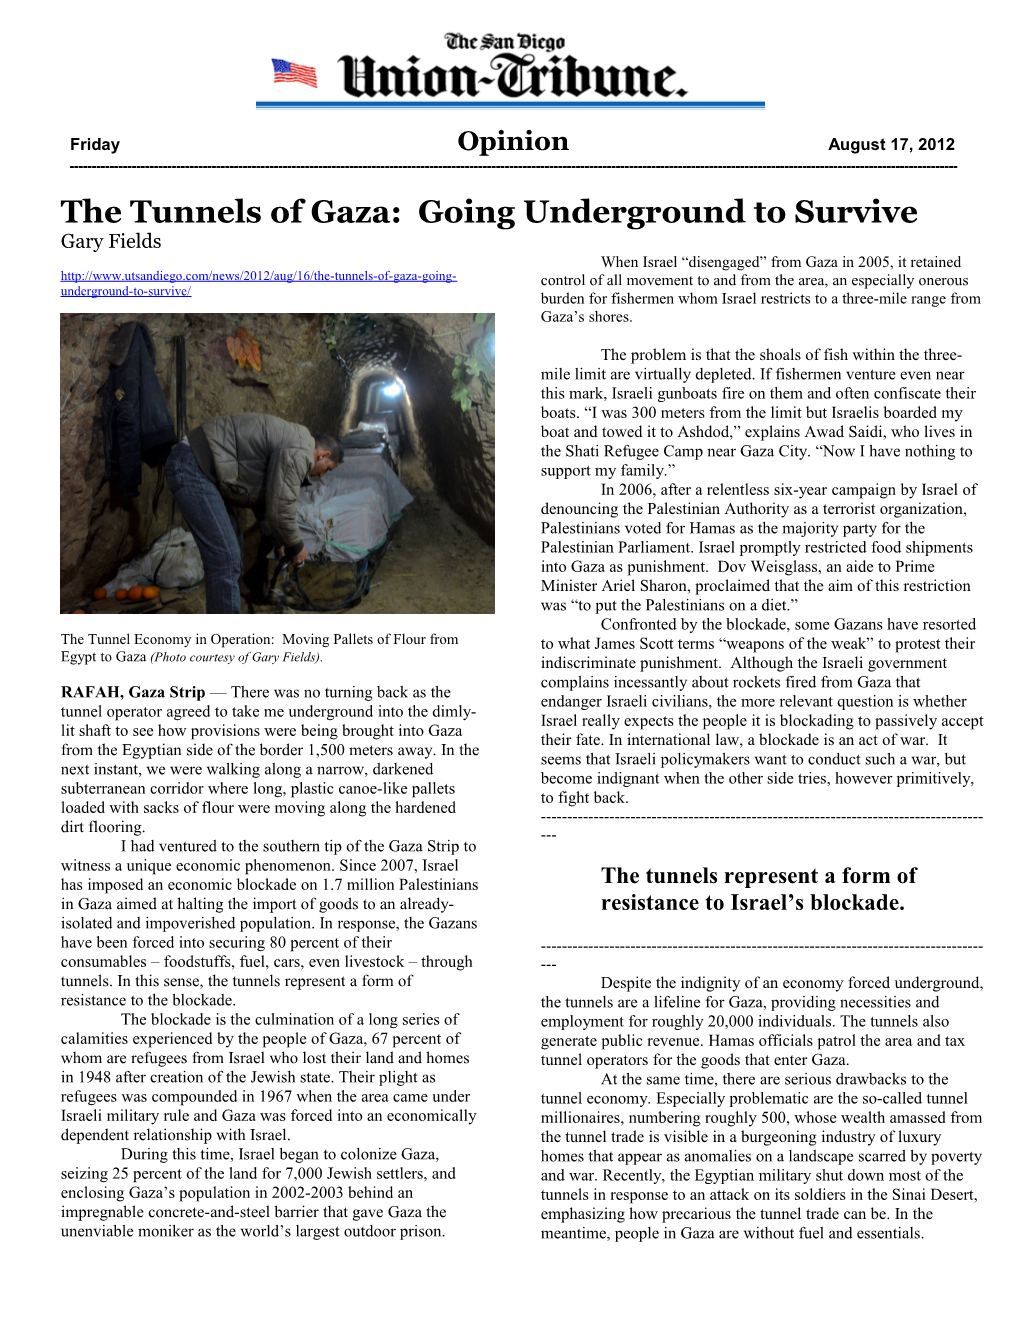 The Tunnels of Gaza: Going Underground to Survive